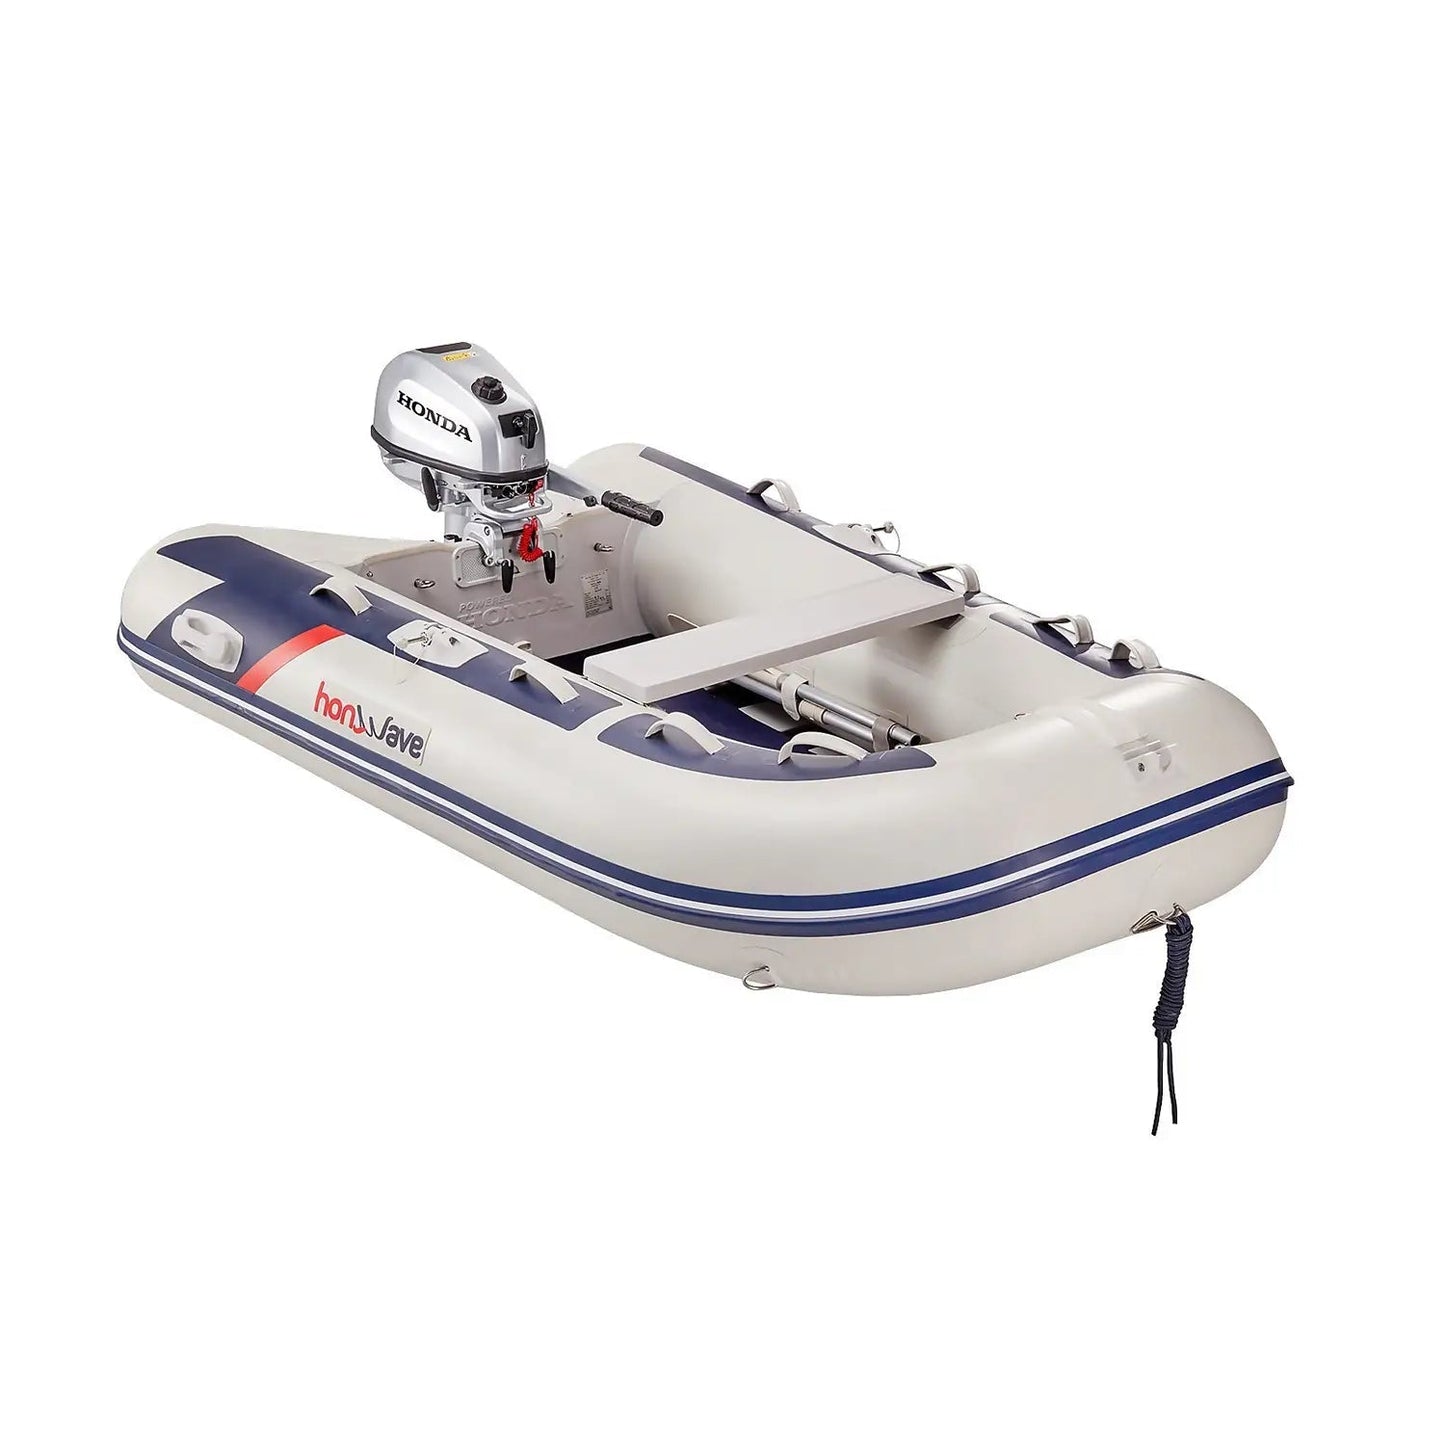 Honwave Package T30AE3 3.0m Inflatable Boat Dinghy Aluminium Floor & Honda Bf2.3 2.3hp Outboard Engine